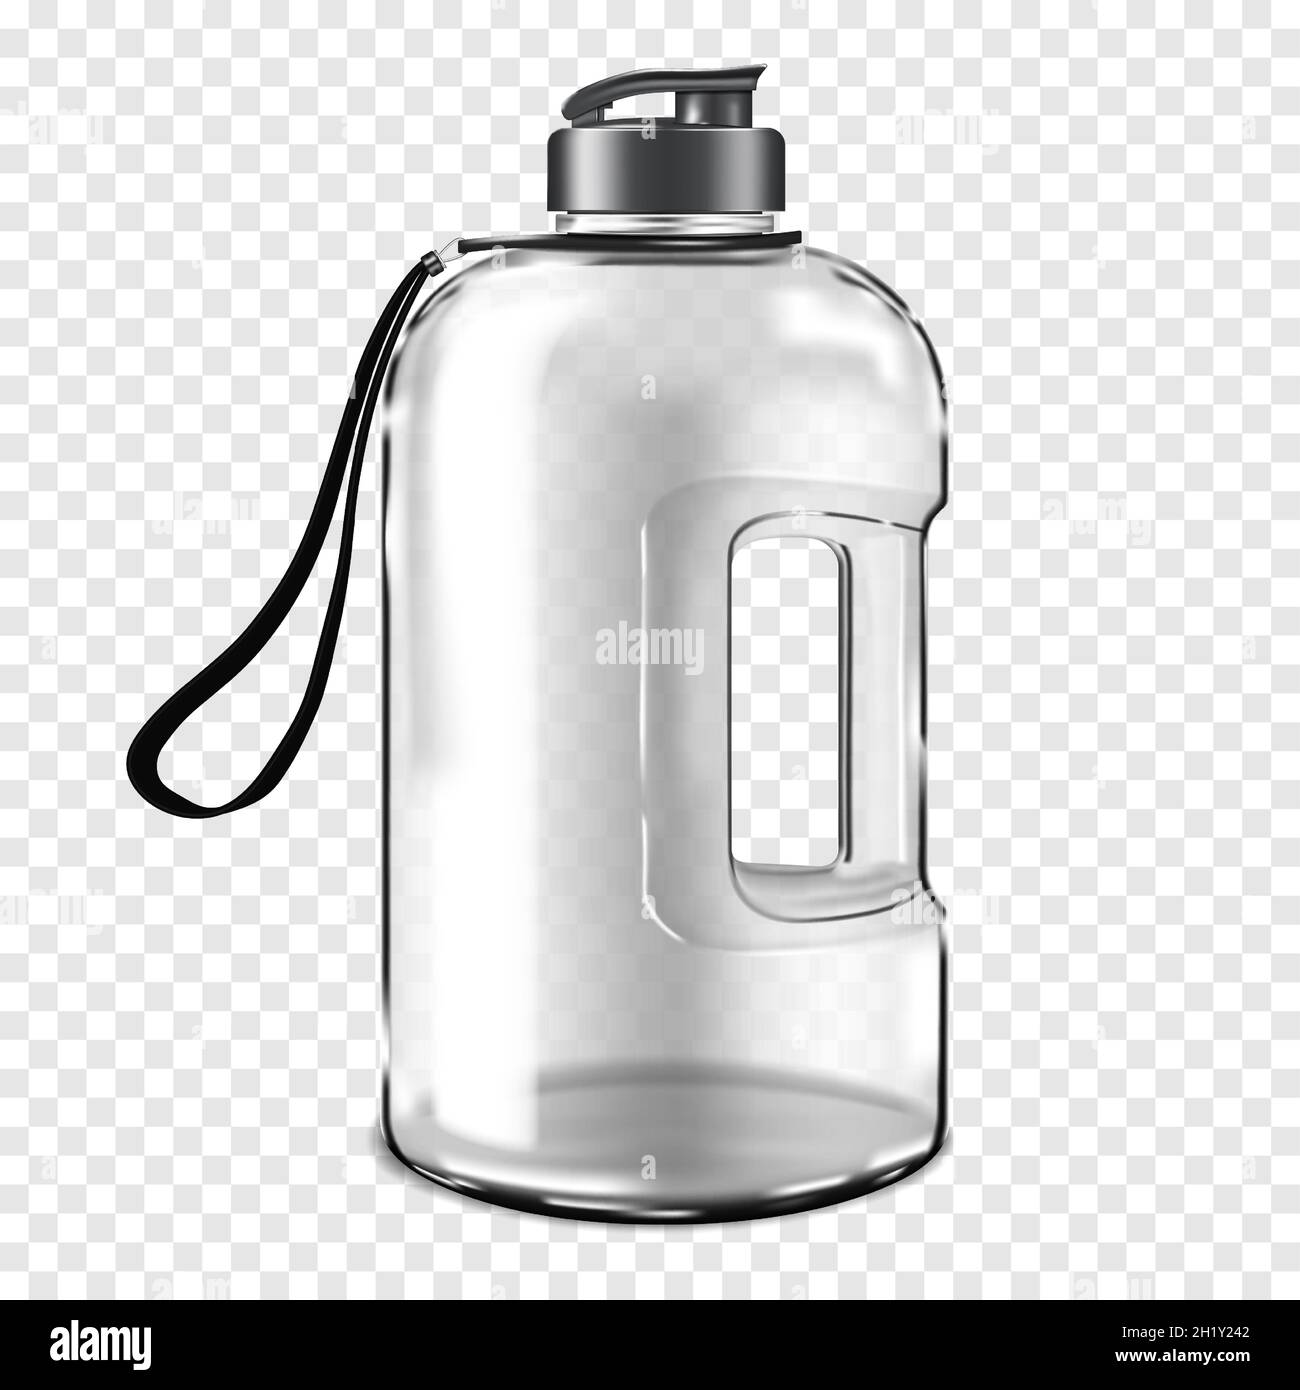 https://c8.alamy.com/comp/2H1Y242/clear-plastic-large-water-bottle-on-transparent-background-realistic-vector-mock-up-portable-gallon-water-jug-mockup-template-for-design-2H1Y242.jpg